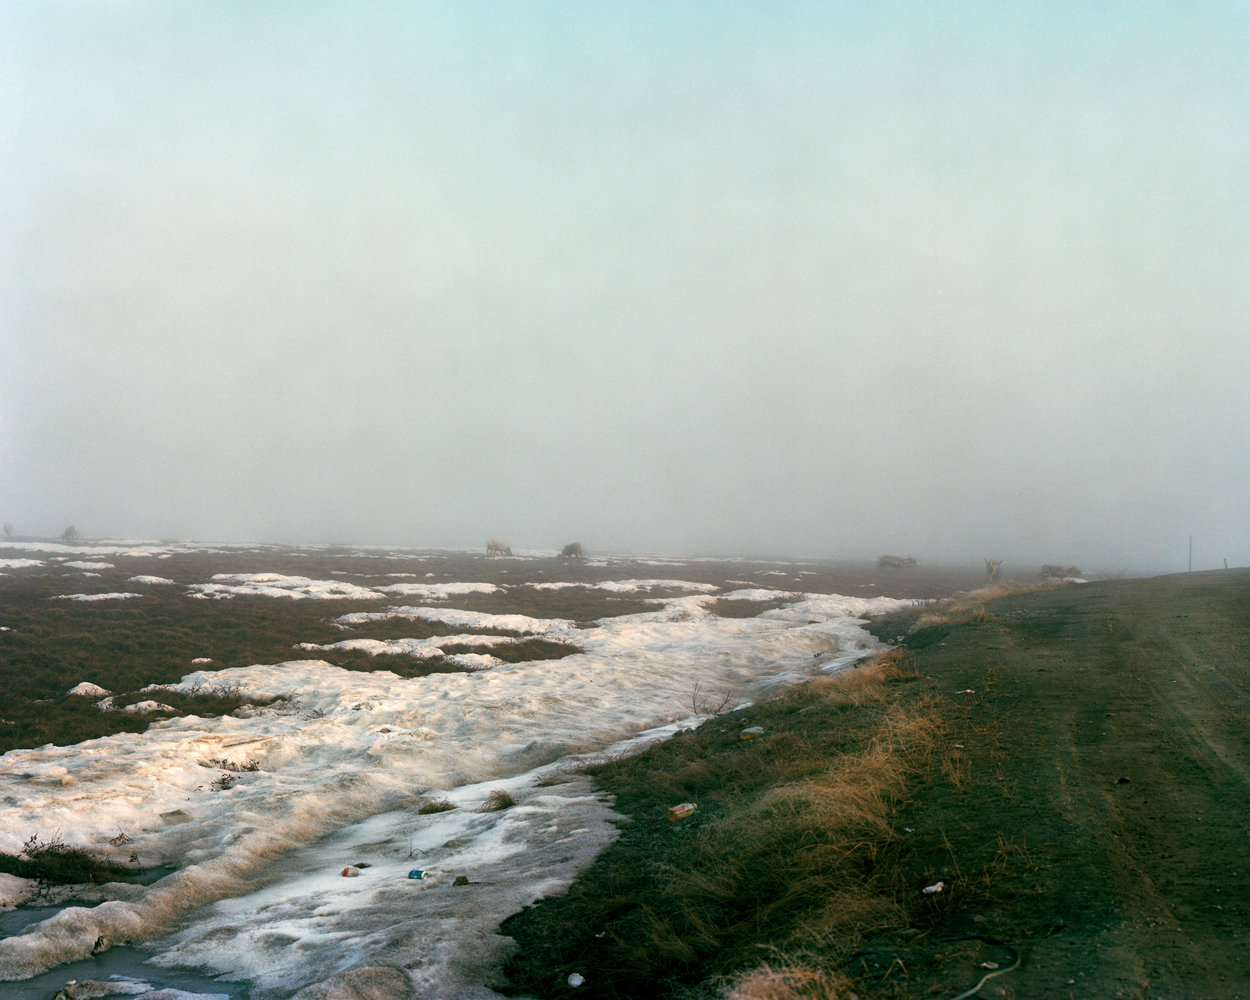 Image: Caribou and Garbage in Fog, 2010.